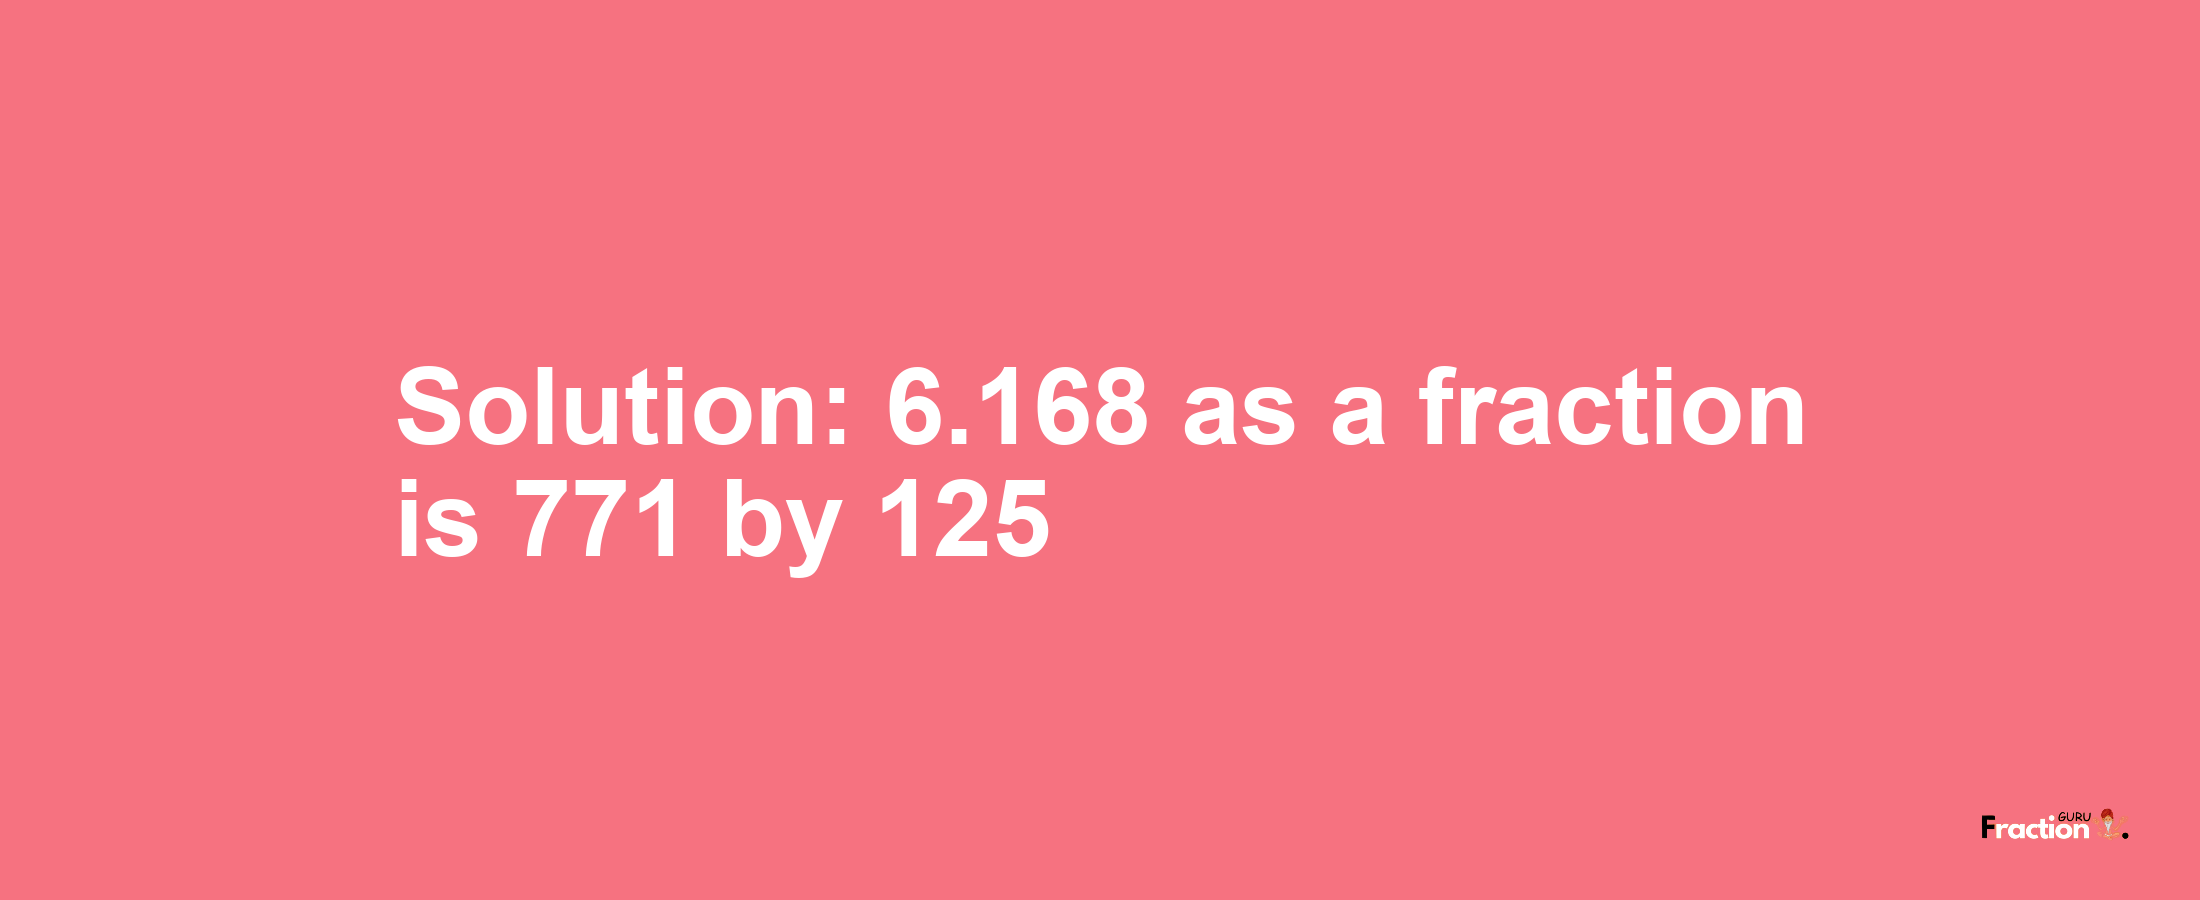 Solution:6.168 as a fraction is 771/125